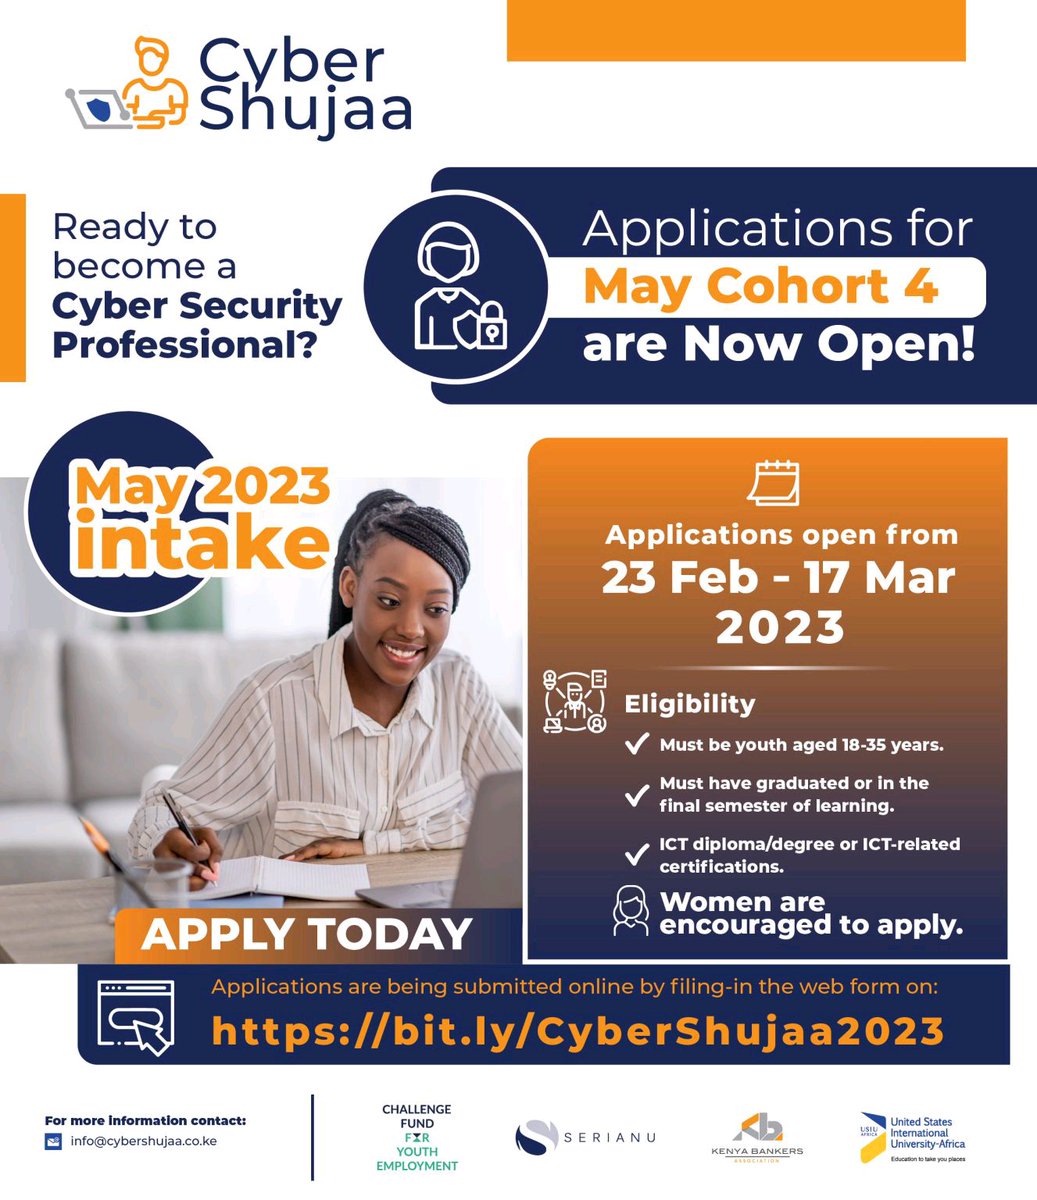 Applications for the next Cyber Shujaa's next cohort are open. If you or anyone you know is interested in starting a career in Cybersecurity, give it a shot.